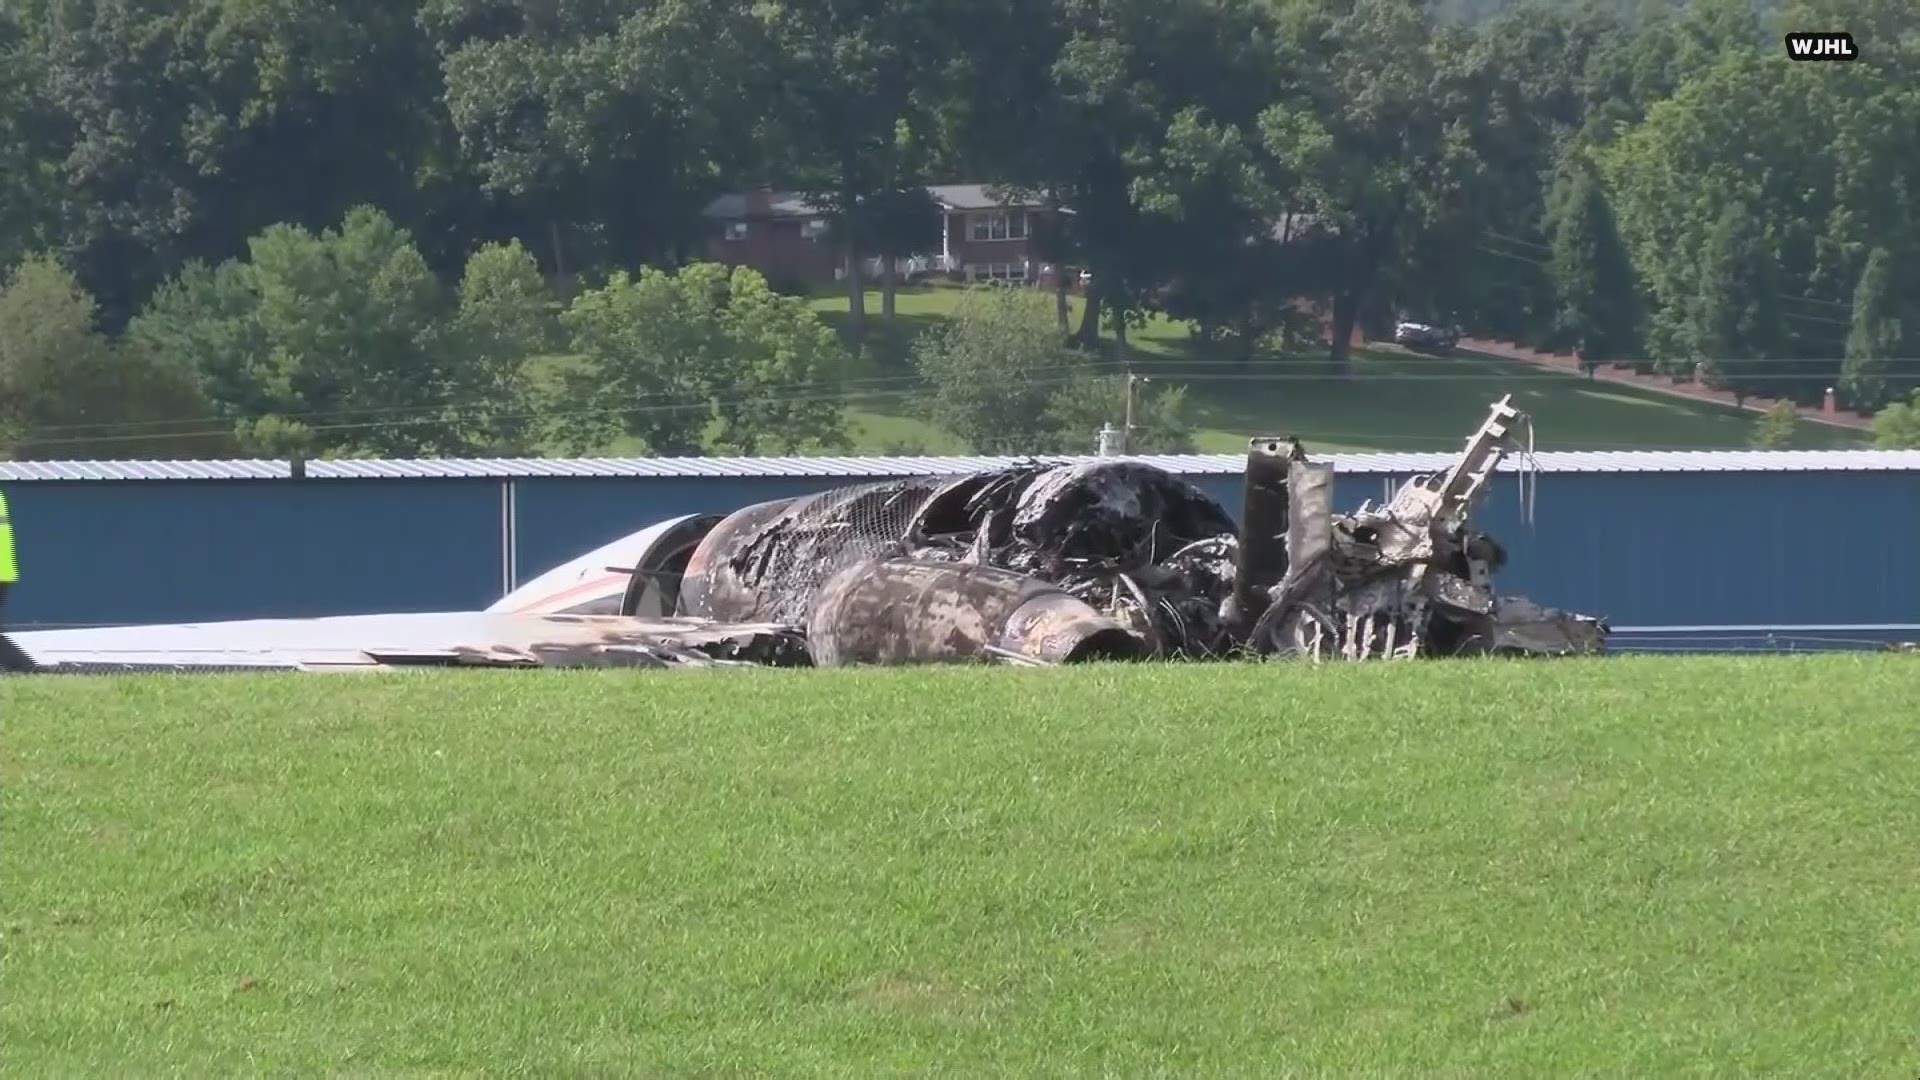 Dale Earnhardt Jr. and his wife Amy are safe after their plane ran off the runway at Elizabethton Airport in Tennessee and then caught on fire.